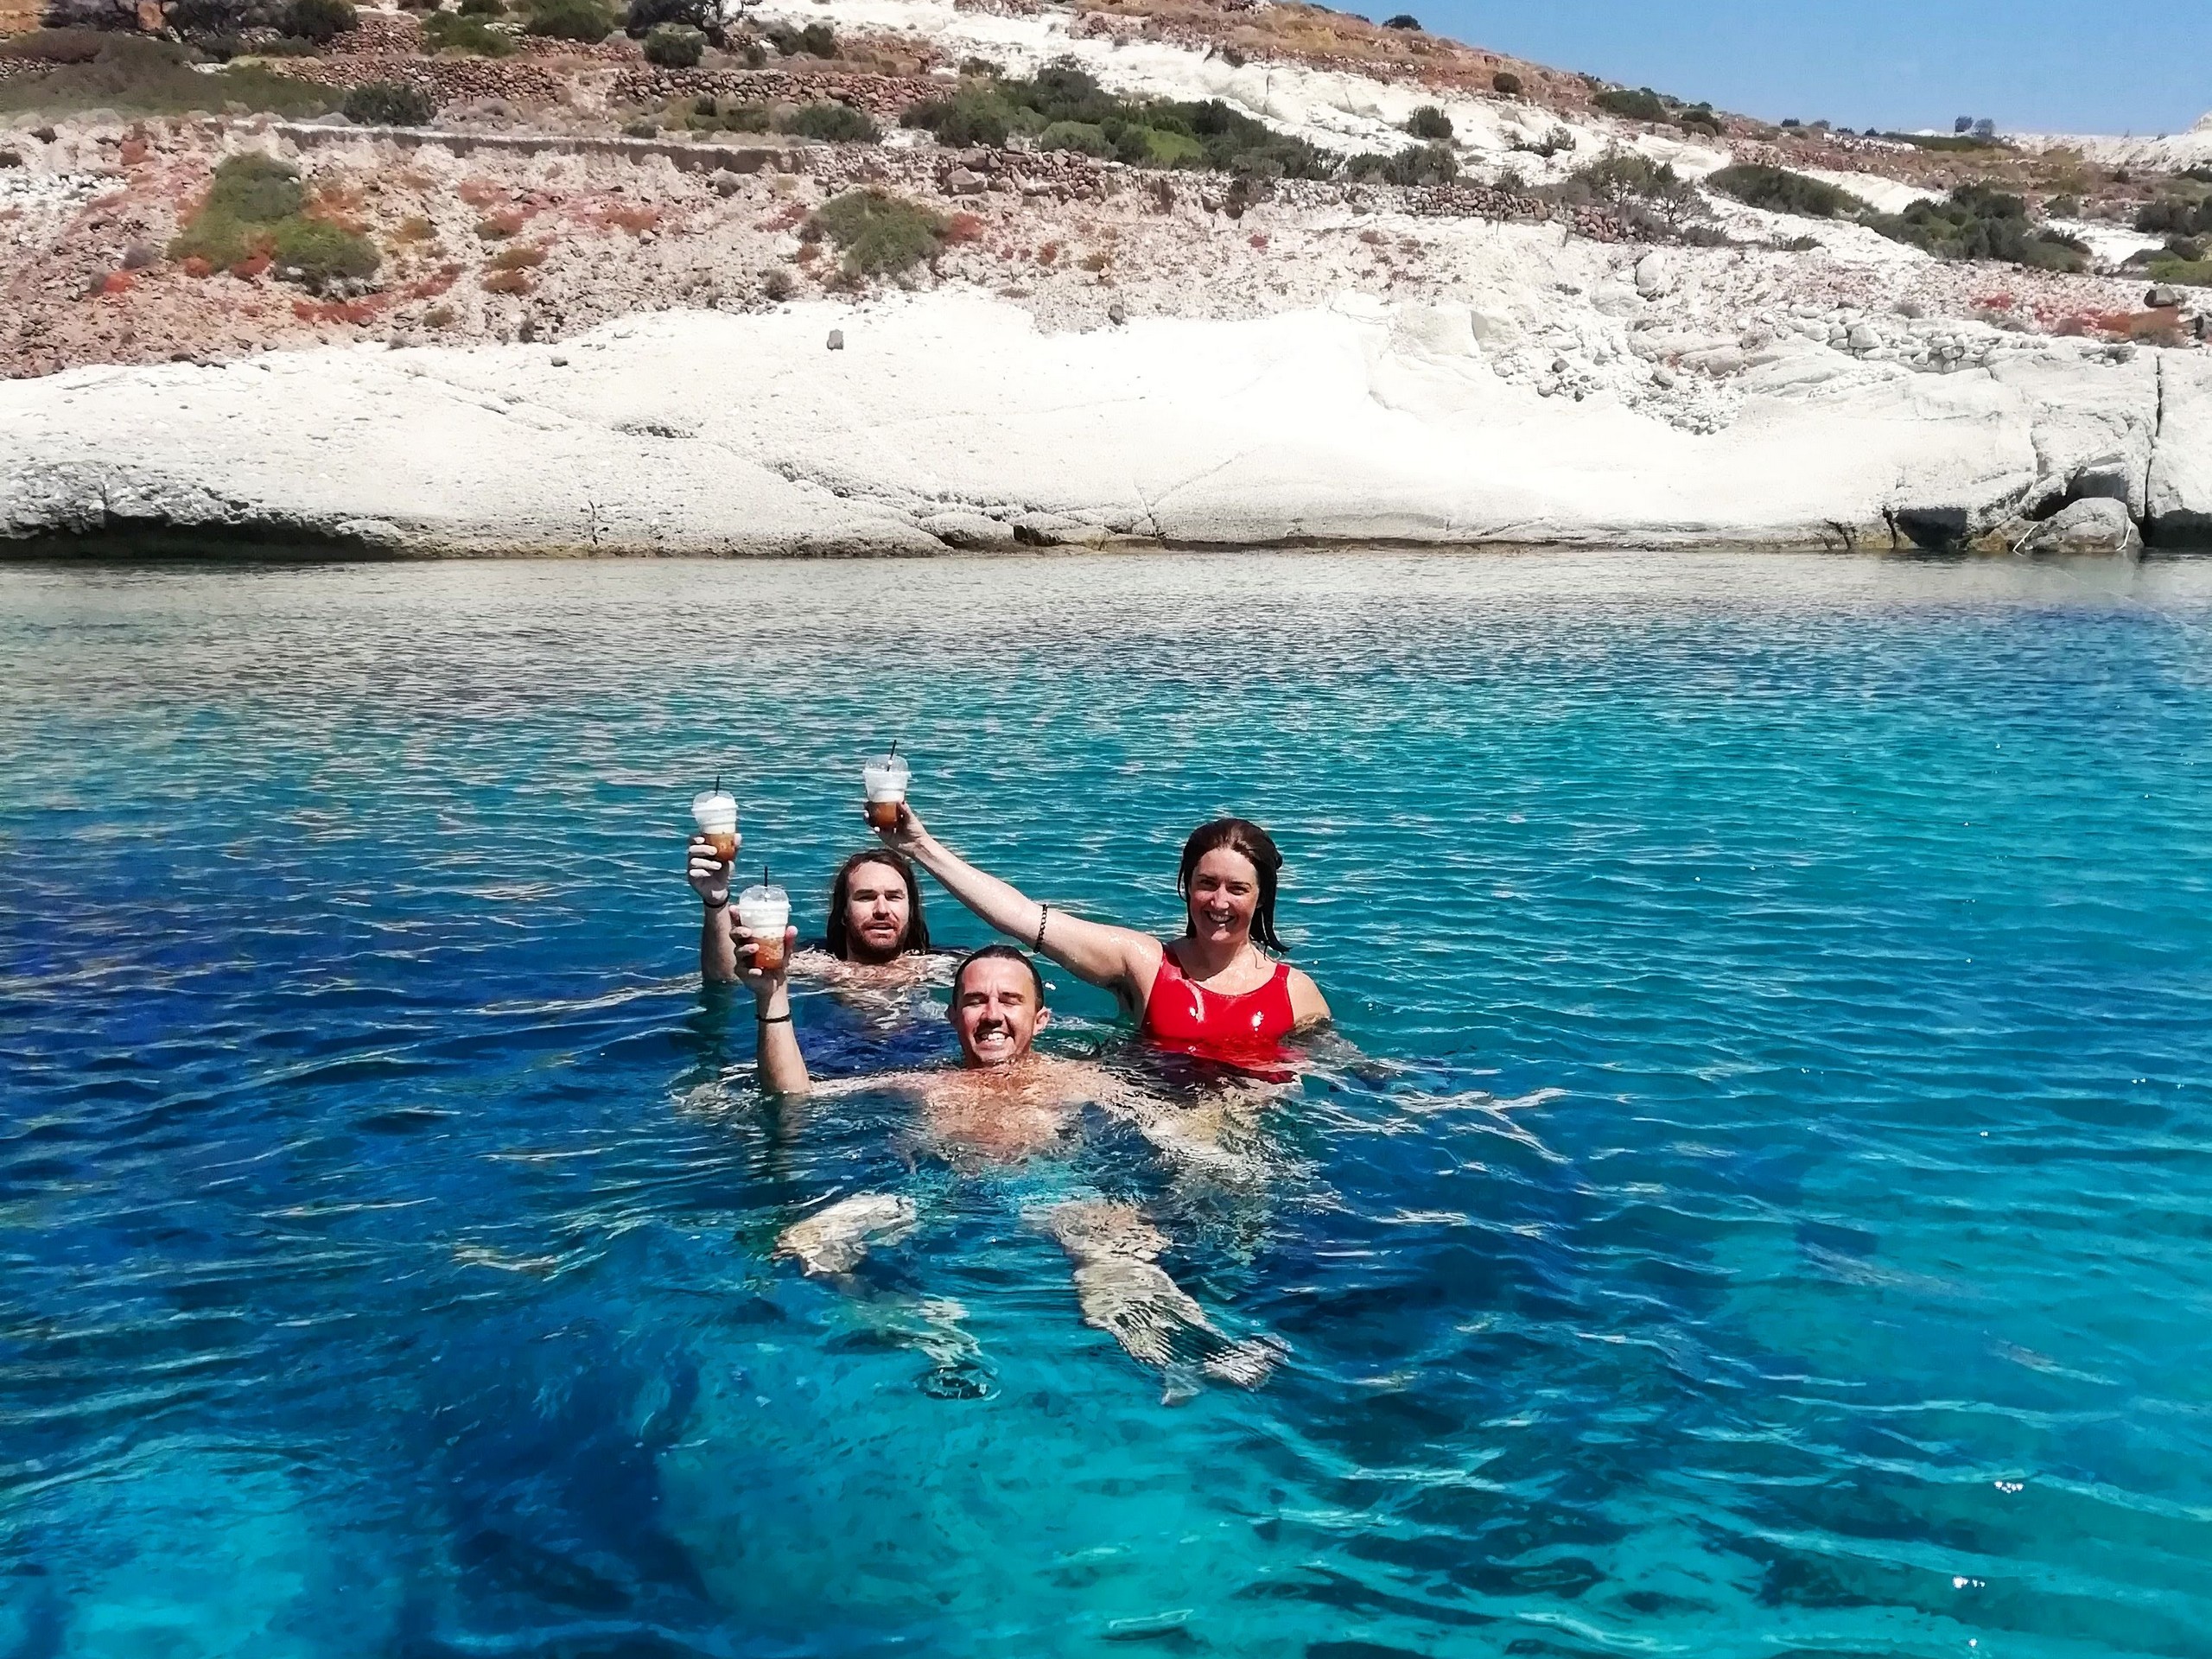 Group of travellers swimming in turquoise waters near Kythnos